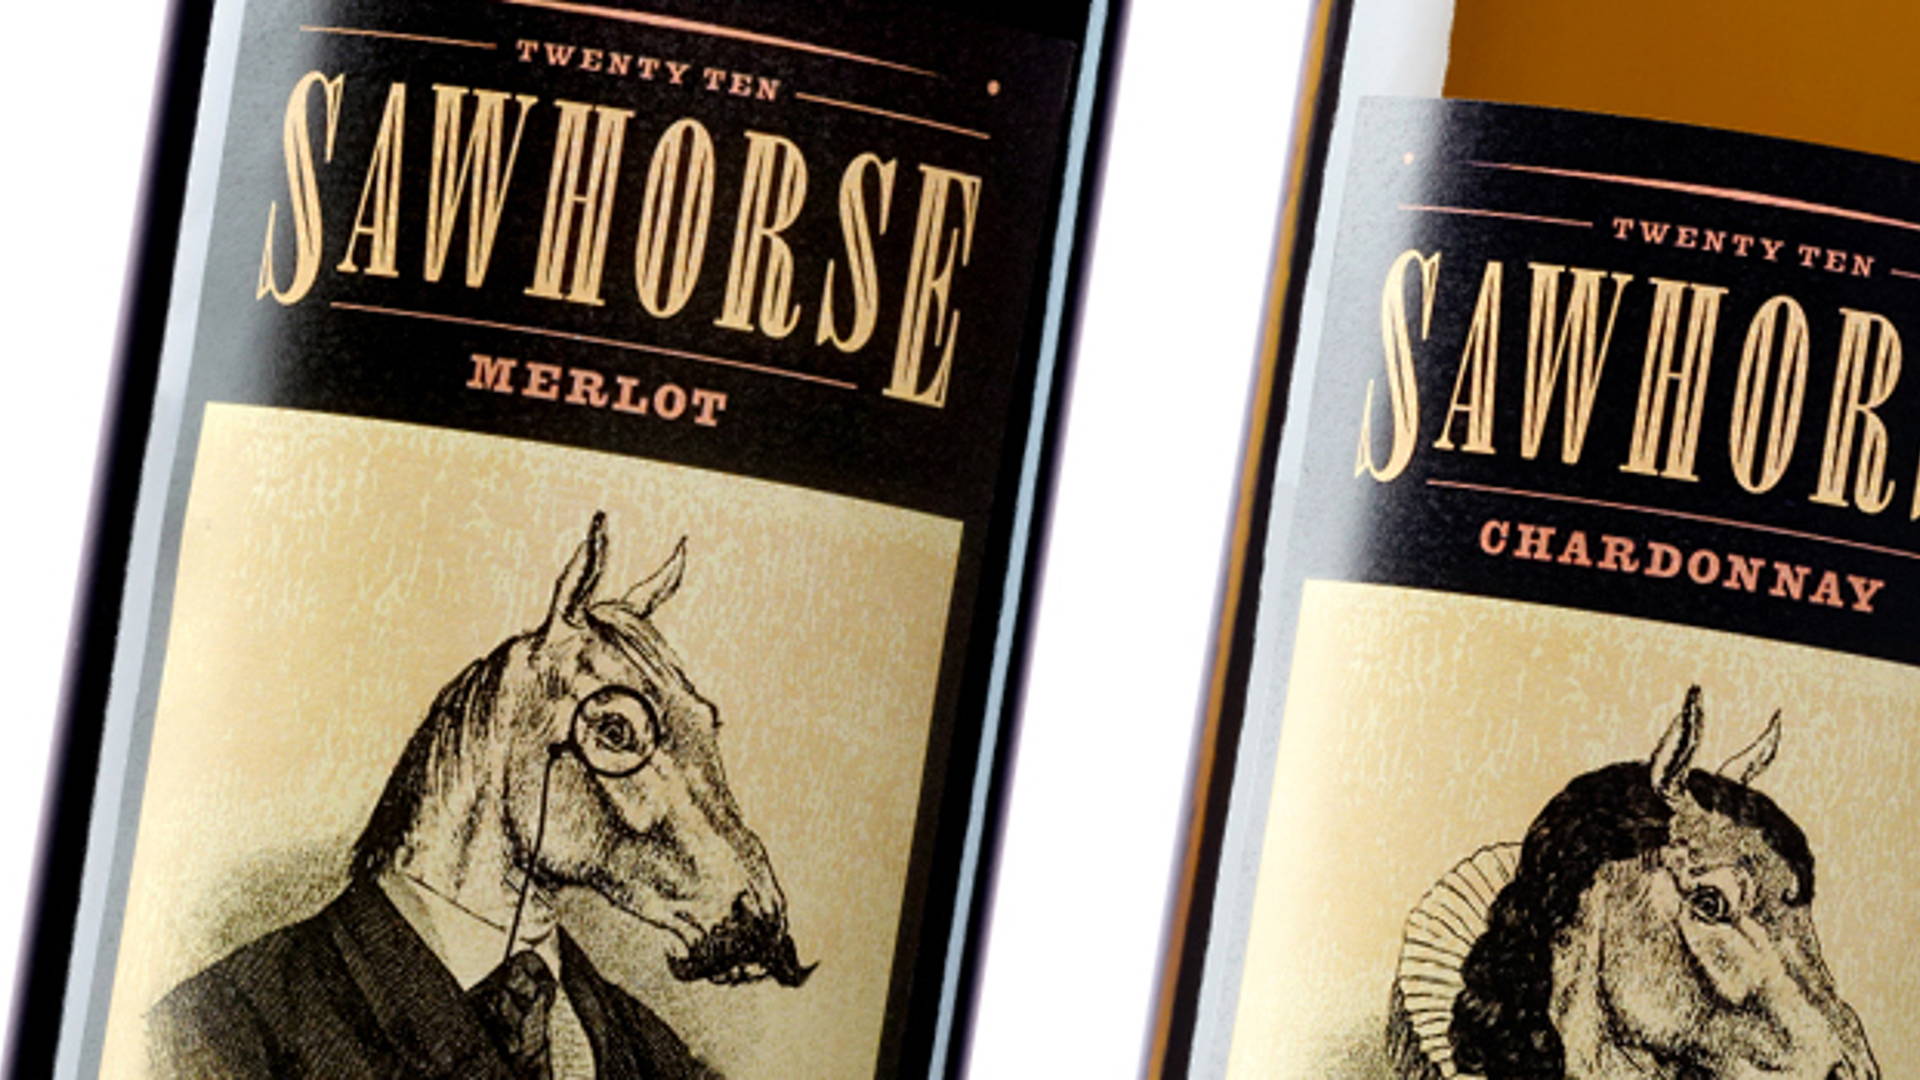 Featured image for Sawhorse Wine